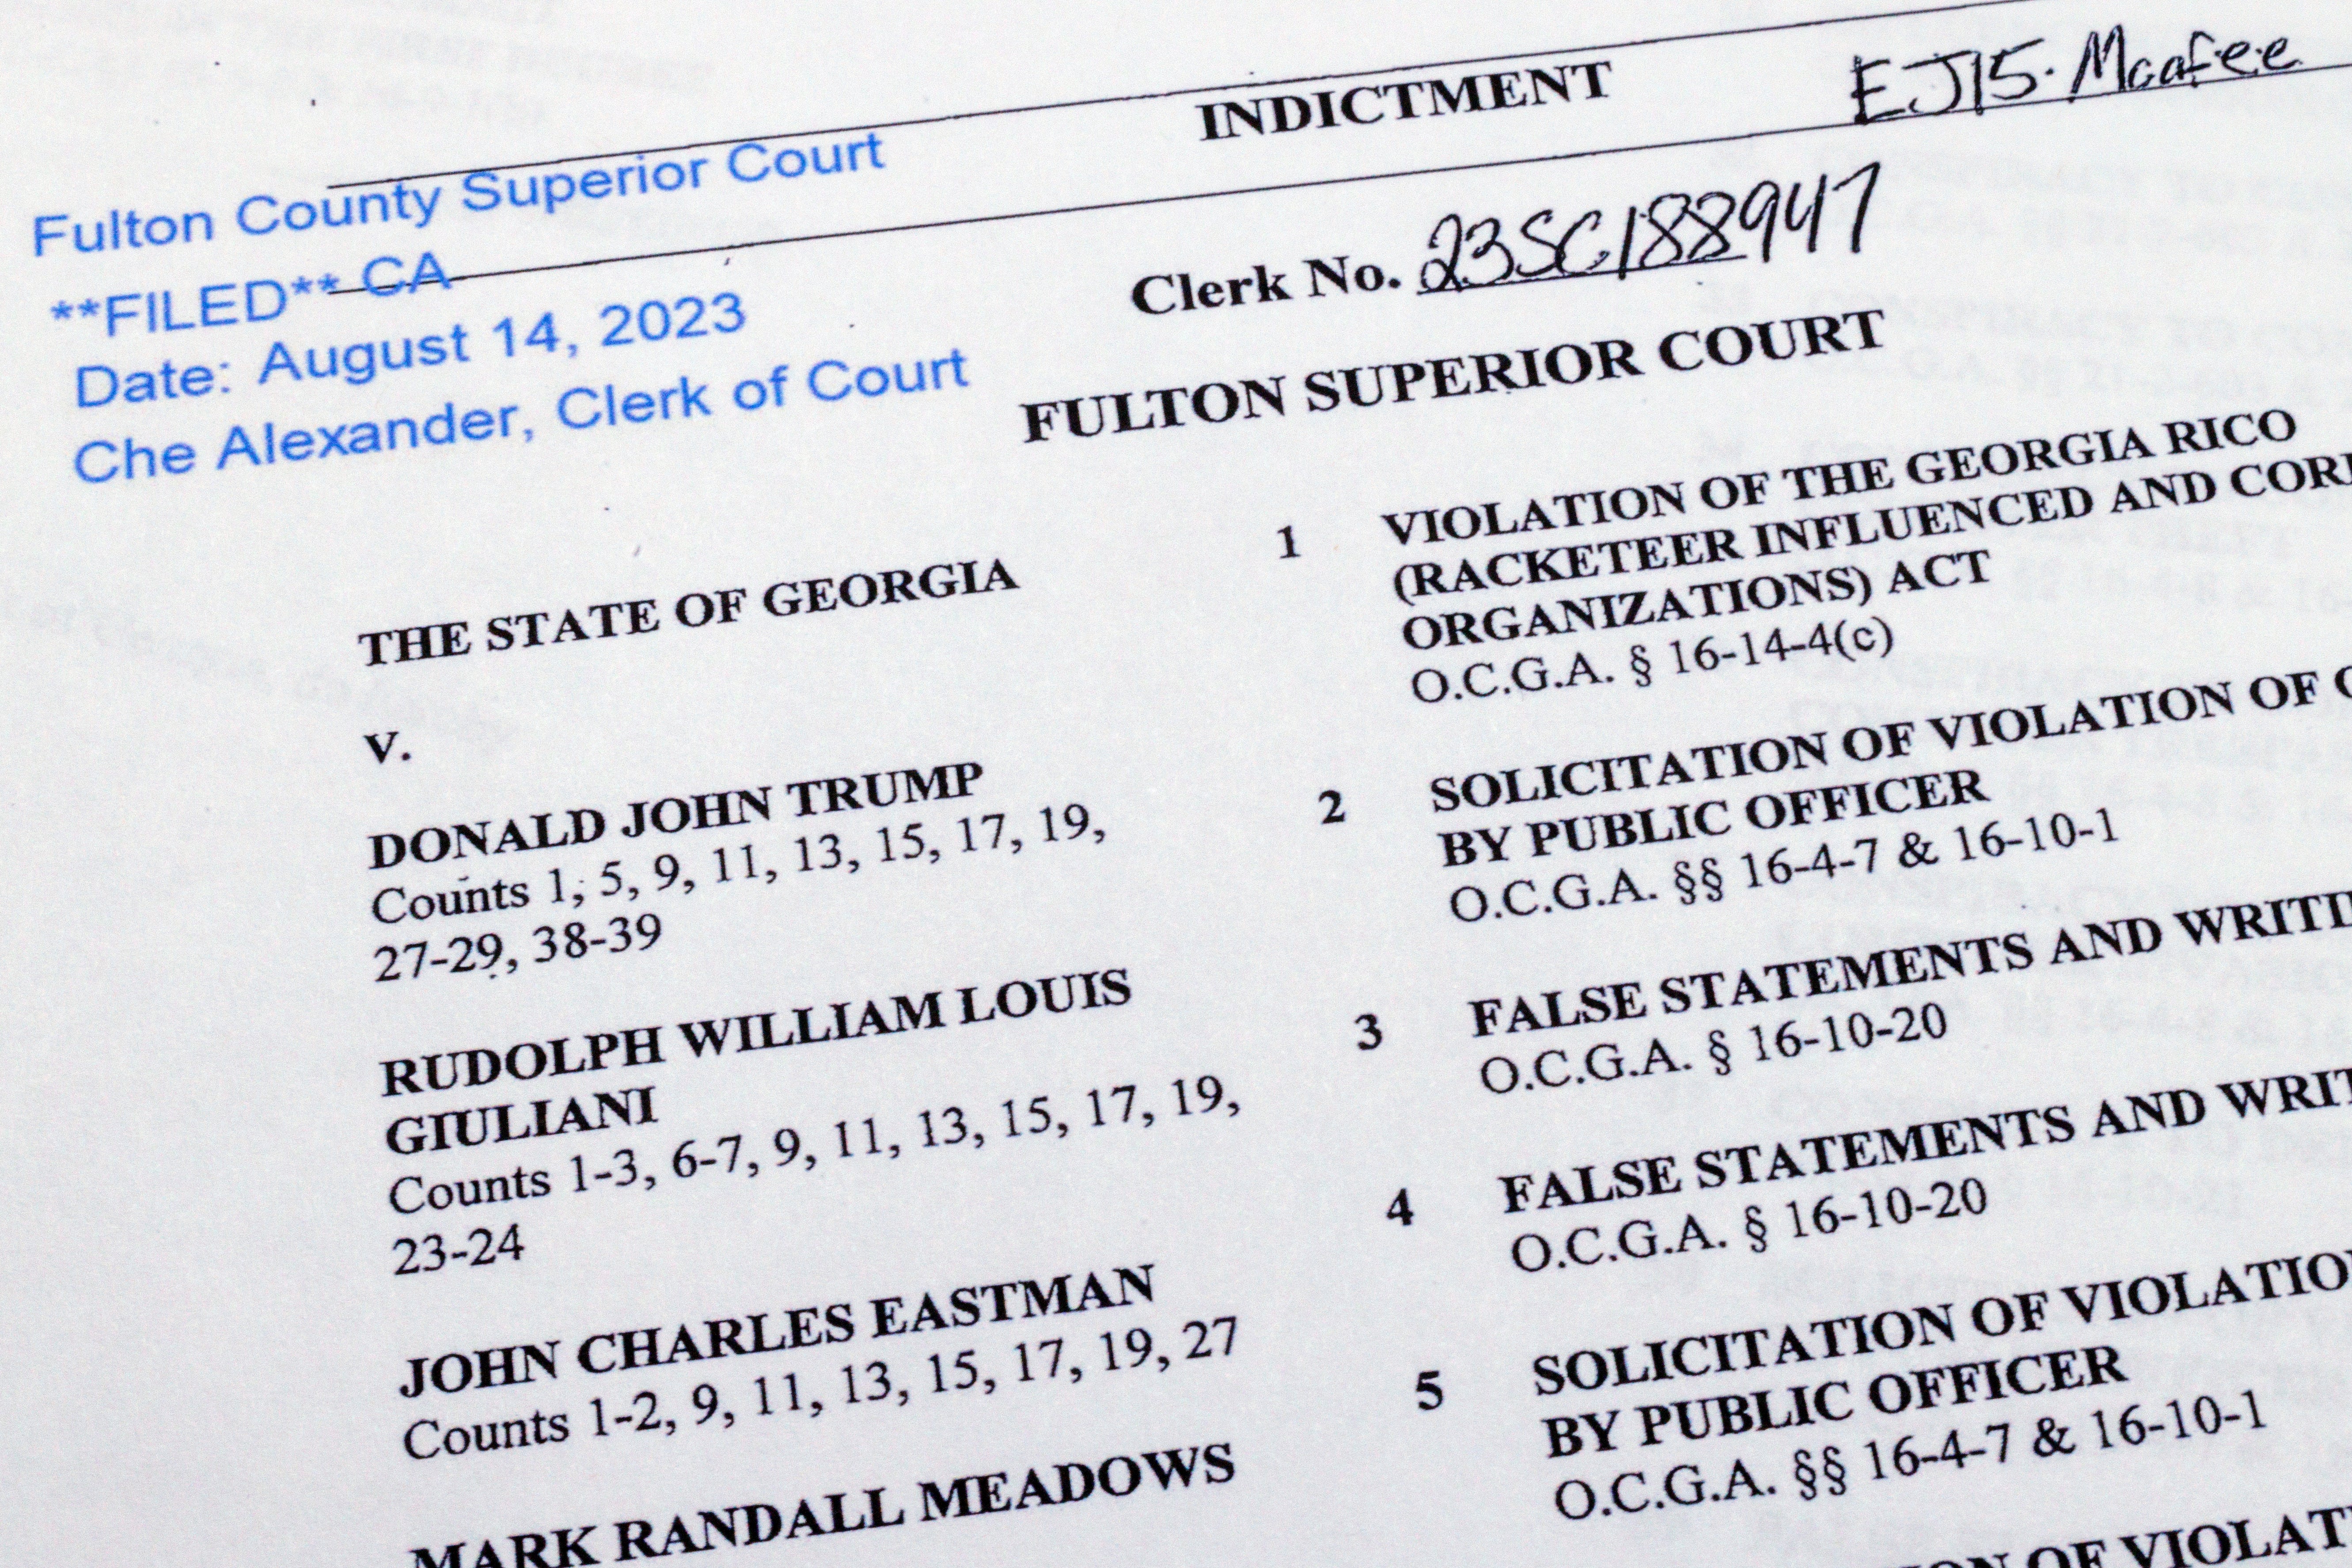 The indictment in Georgia against former President Donald Trump